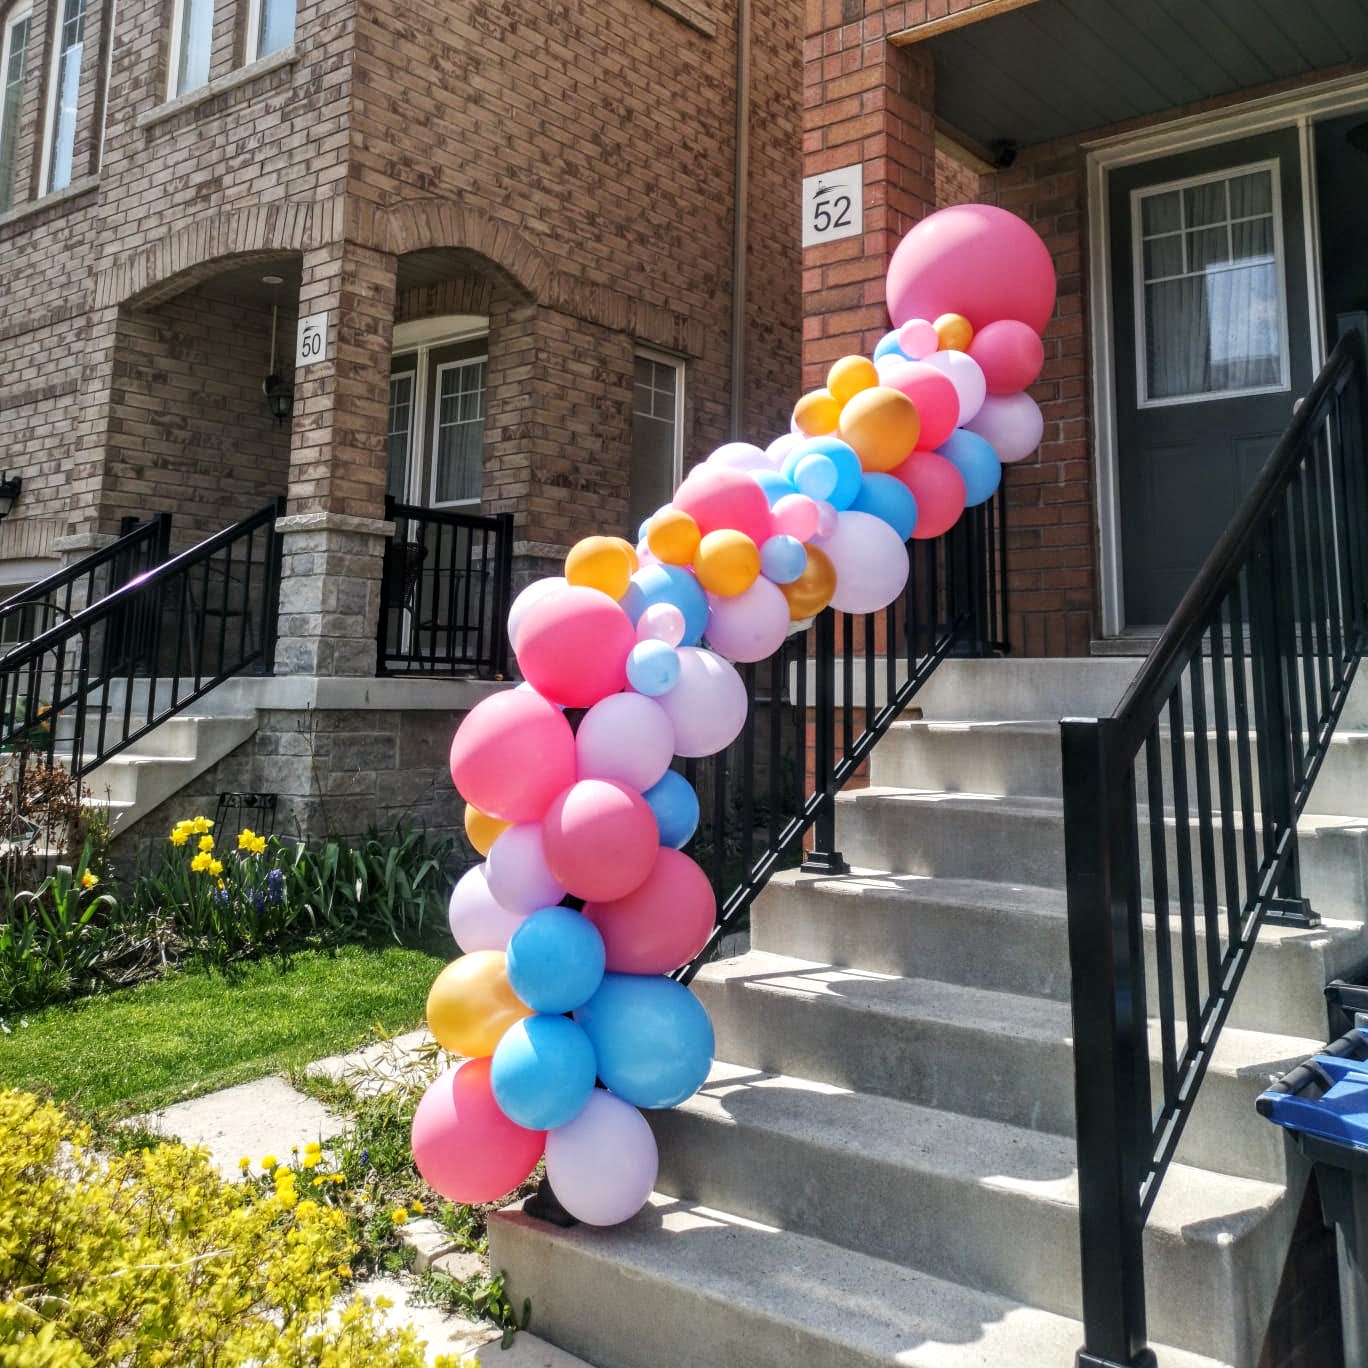 What outdoor spaces can you use with your balloon decor Mississauga?